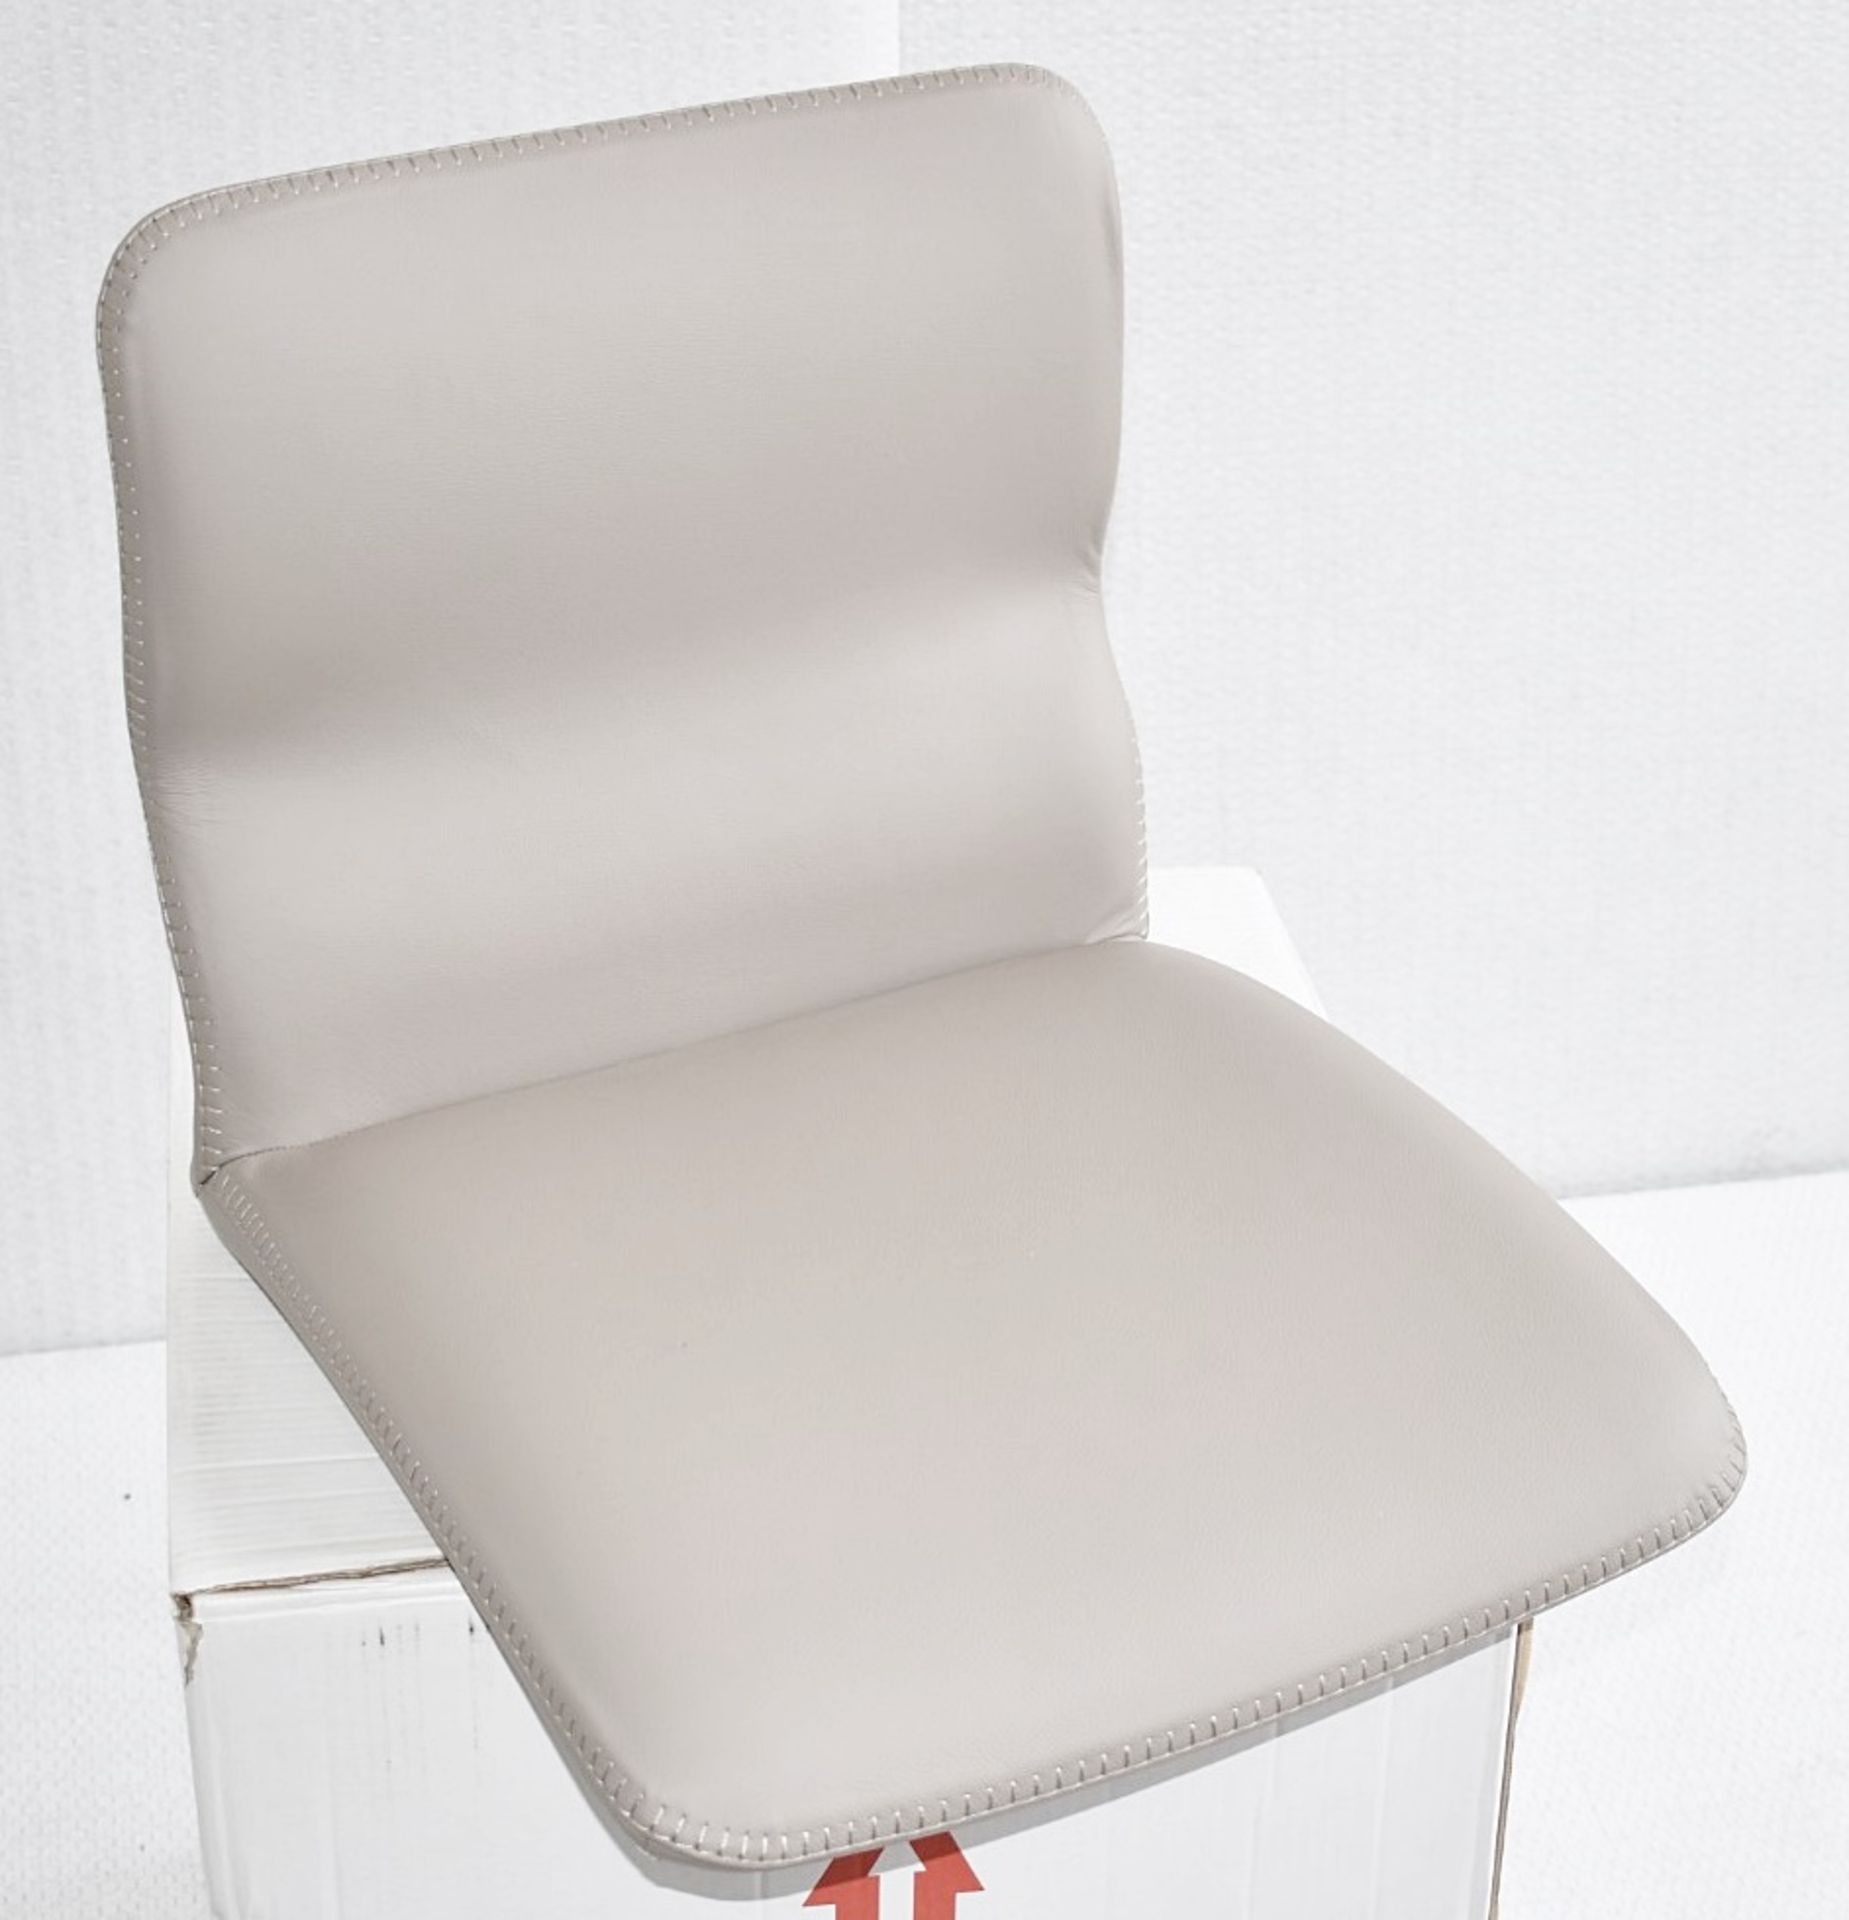 1 x CATTELAN ITALIA Designer Leather Upholstered Seat For Victor Stool, in Light Taupe - Image 3 of 7